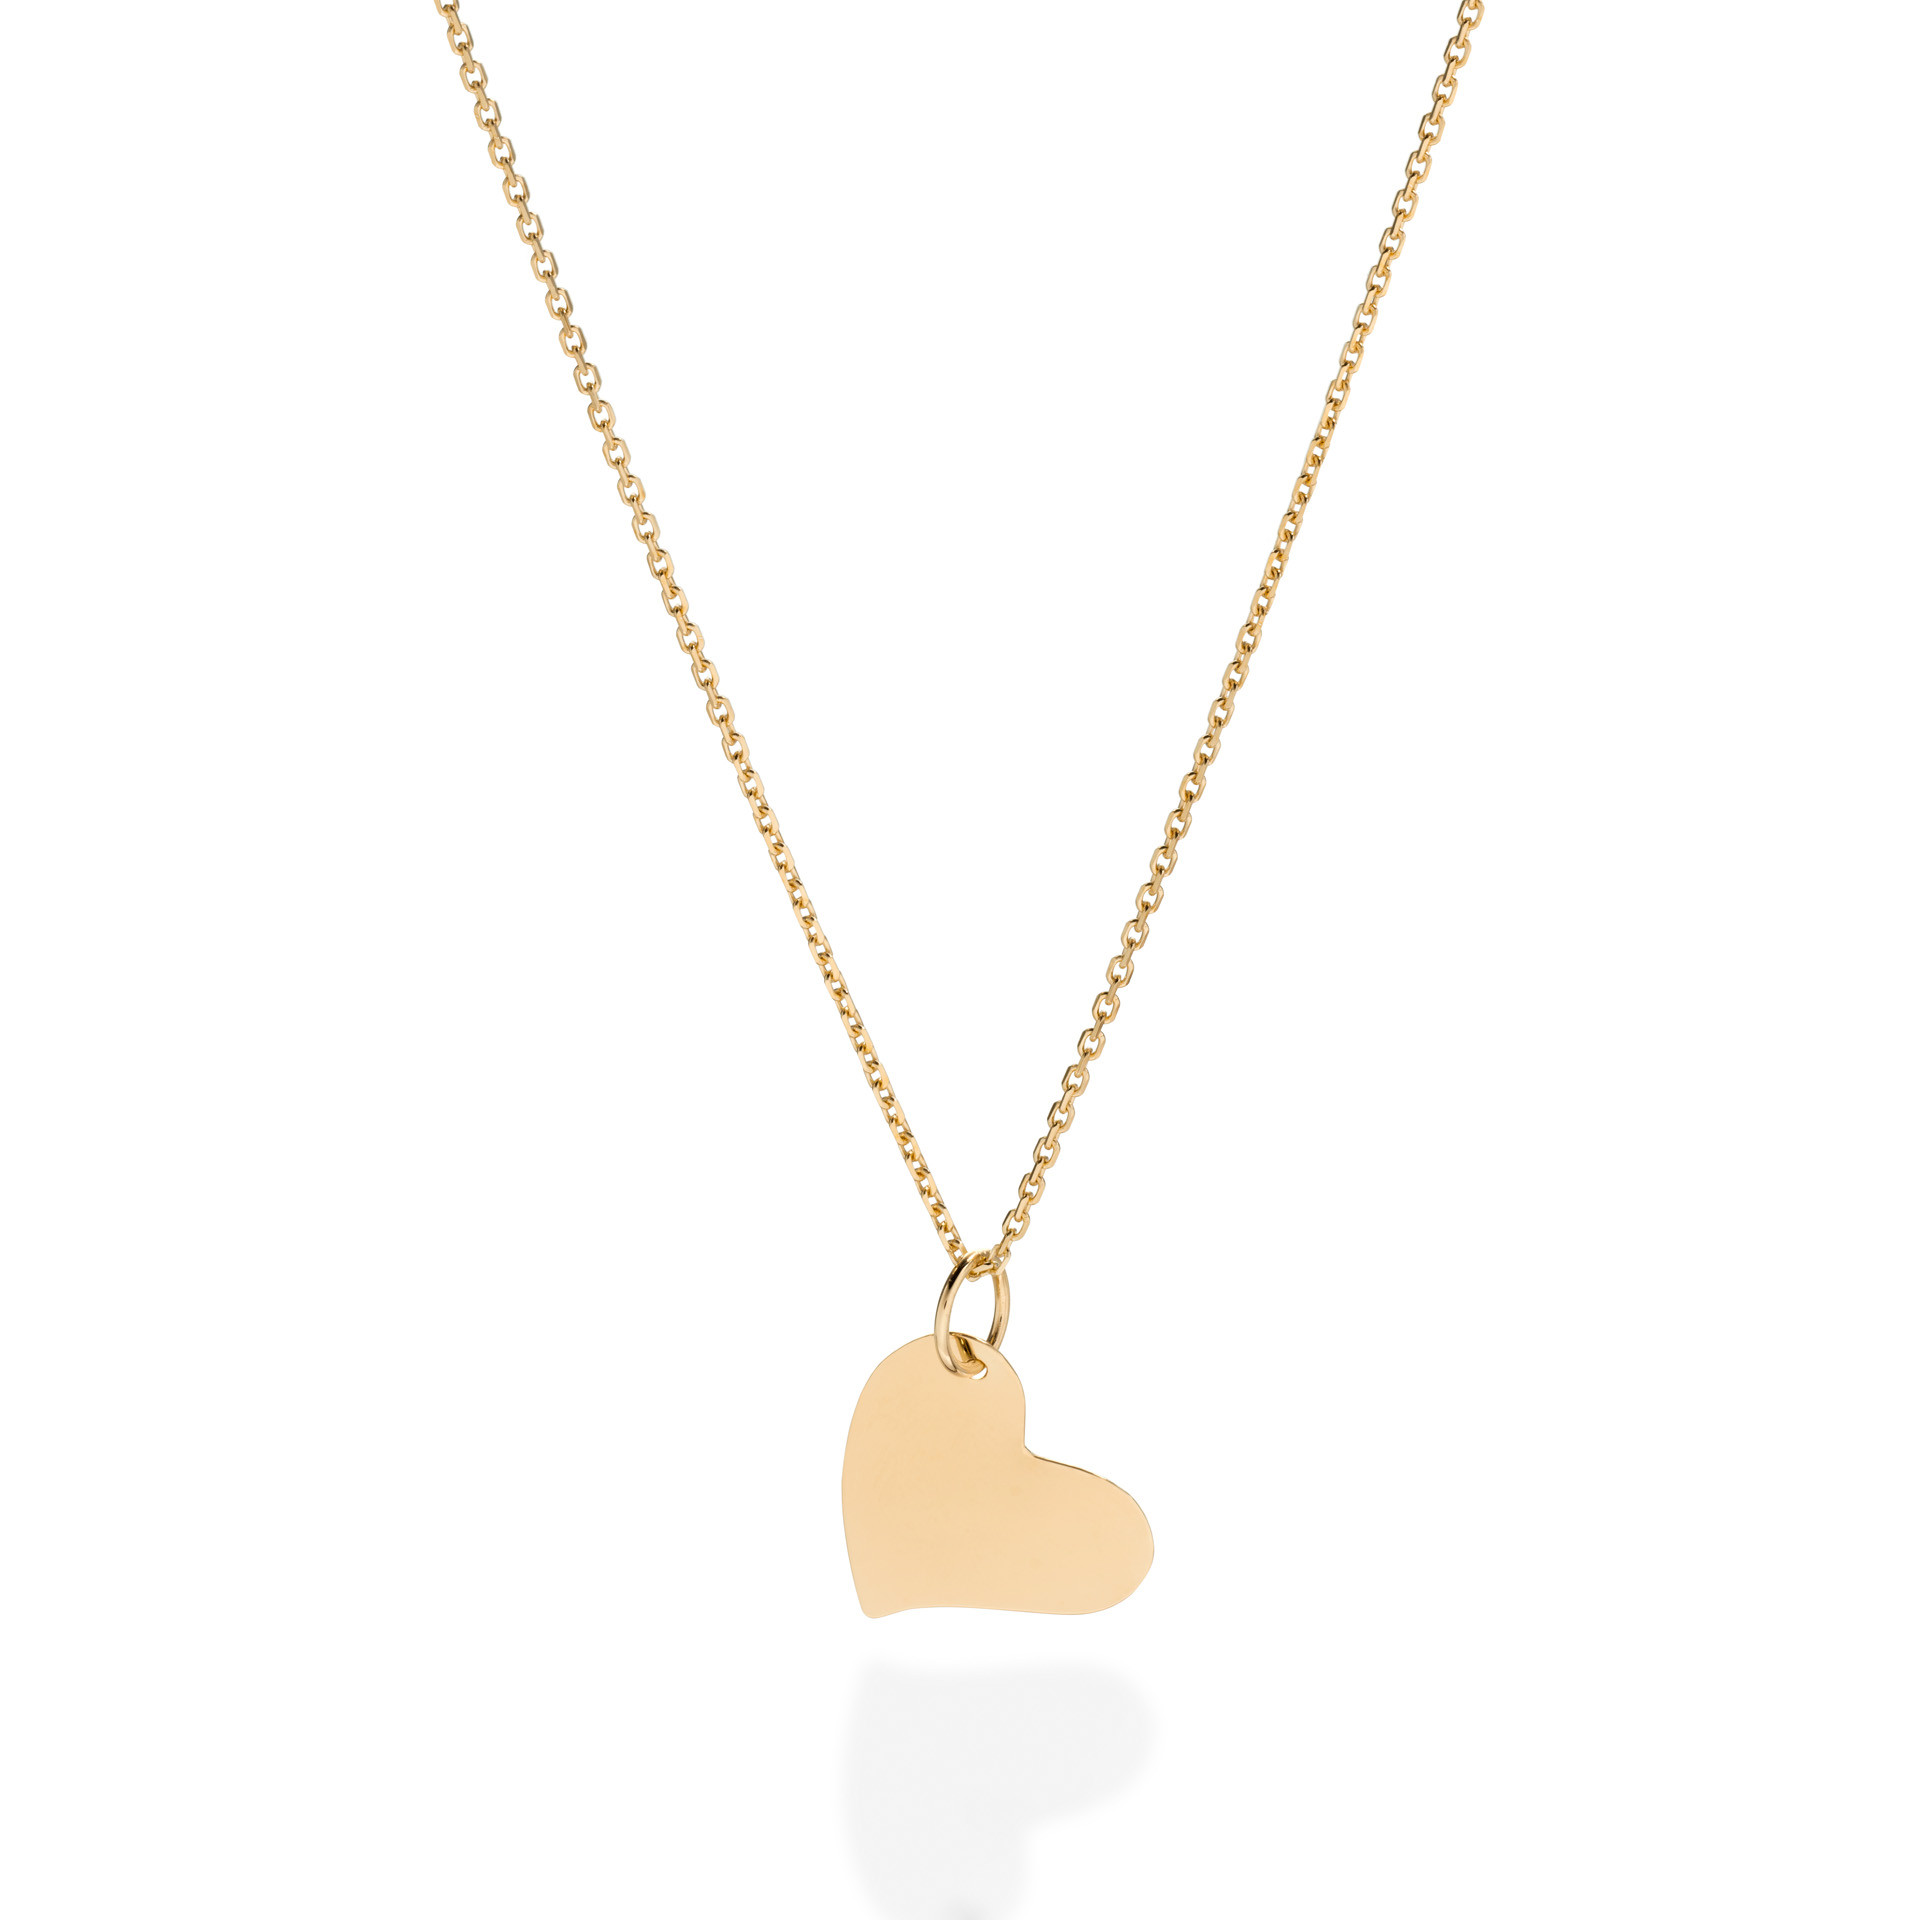 golden neclace with heart-shaped pendant